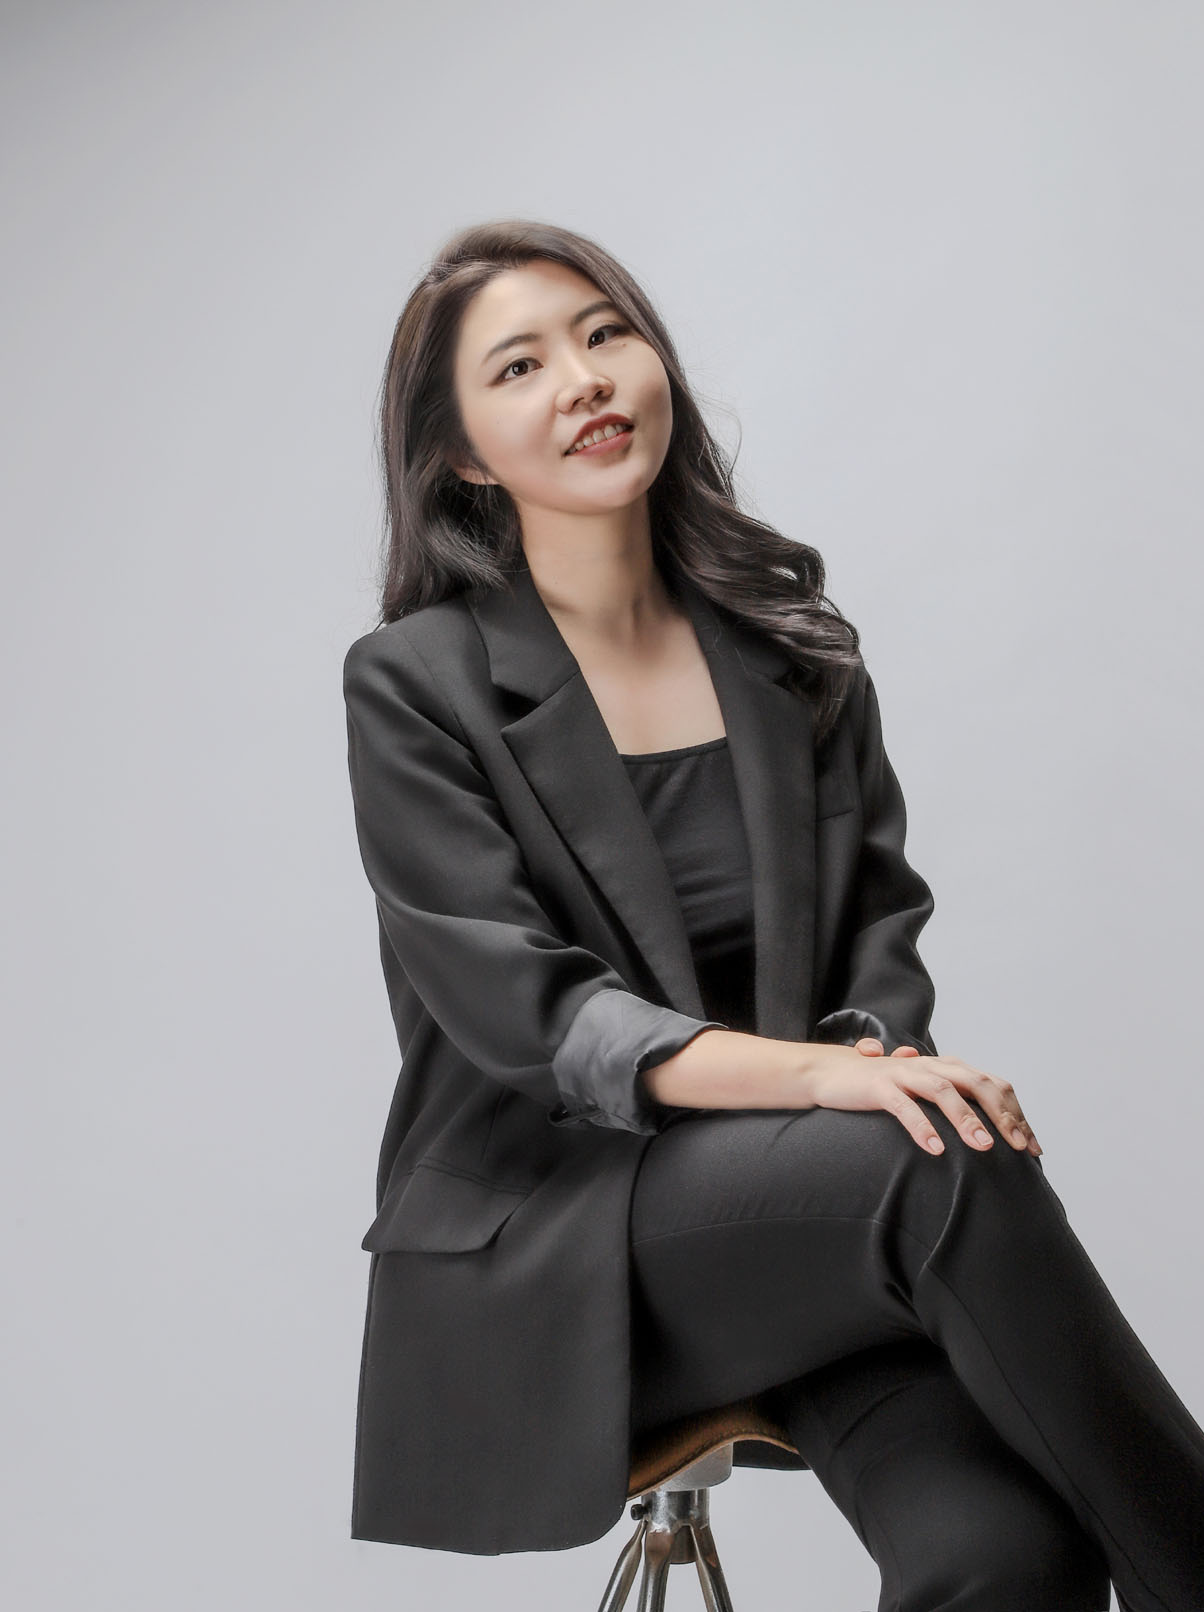 [Interview] MIMIDESIGN CEO Han Sang-mi “We infused cellphone cases with Goryeo celadon green.”